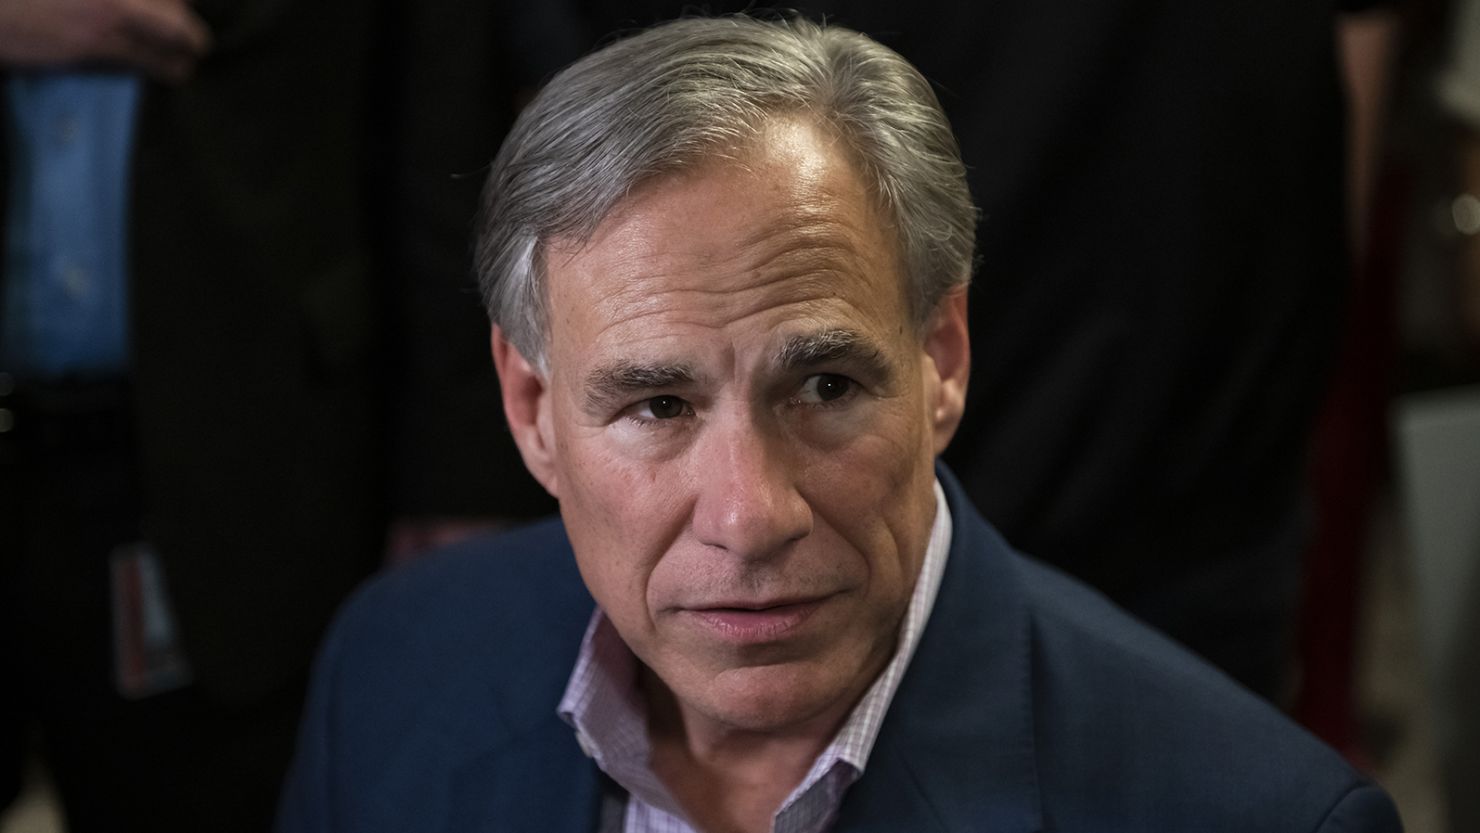 Greg Abbott, governor of Texas, speaks during a Get Out The Vote campaign event in Beaumont, Texas, on Thursday, Feb. 17.